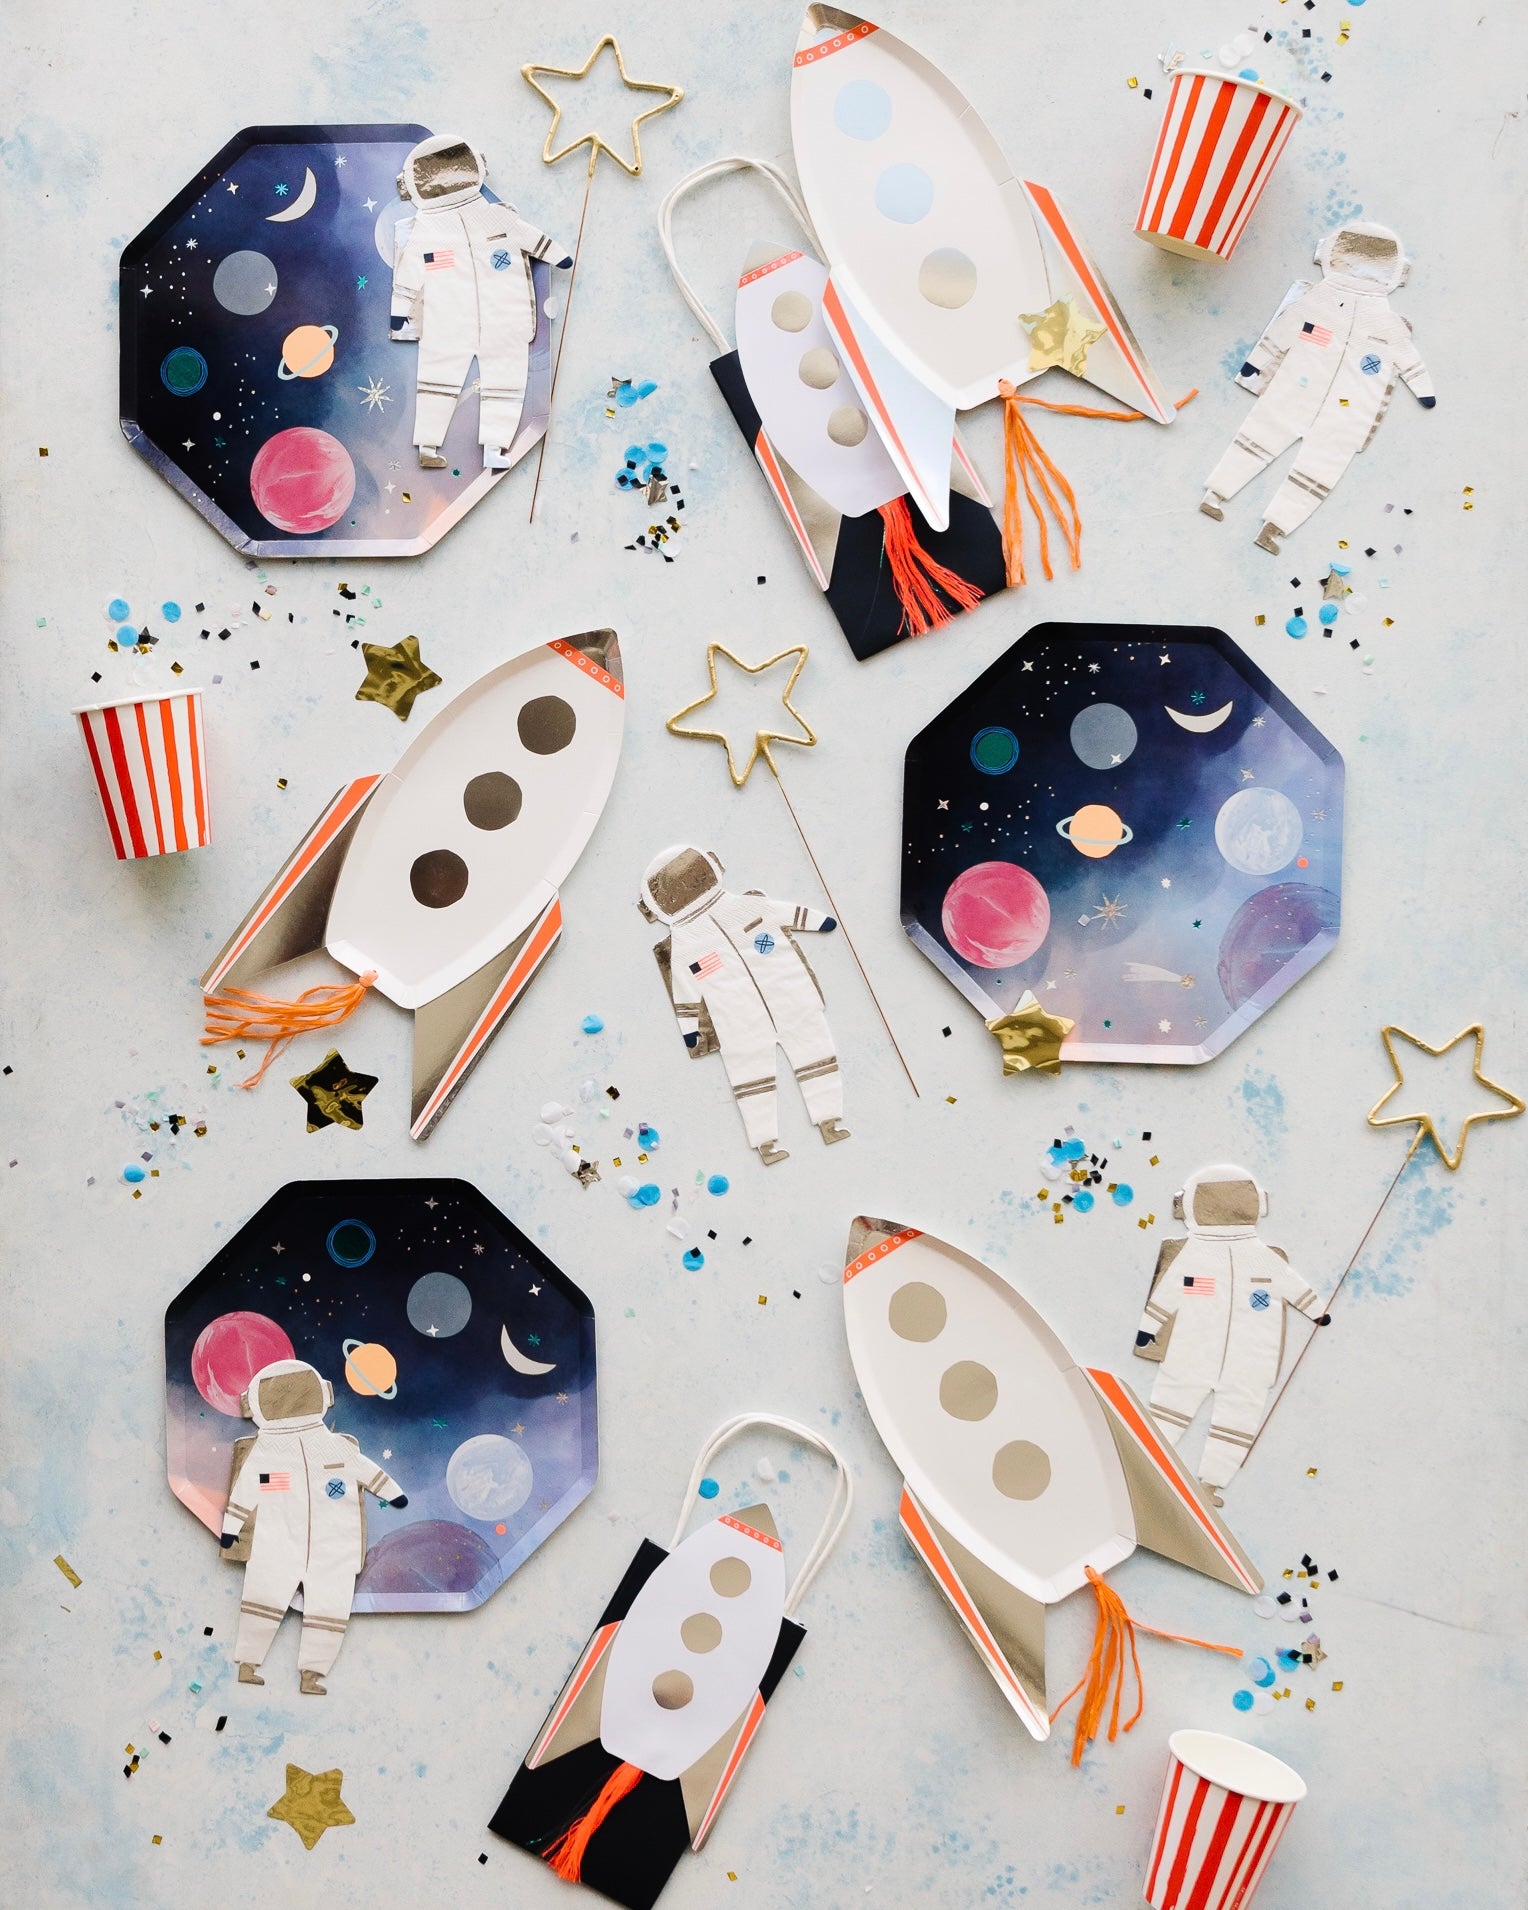 Space-themed party supplies set out for a kid's birthday party.